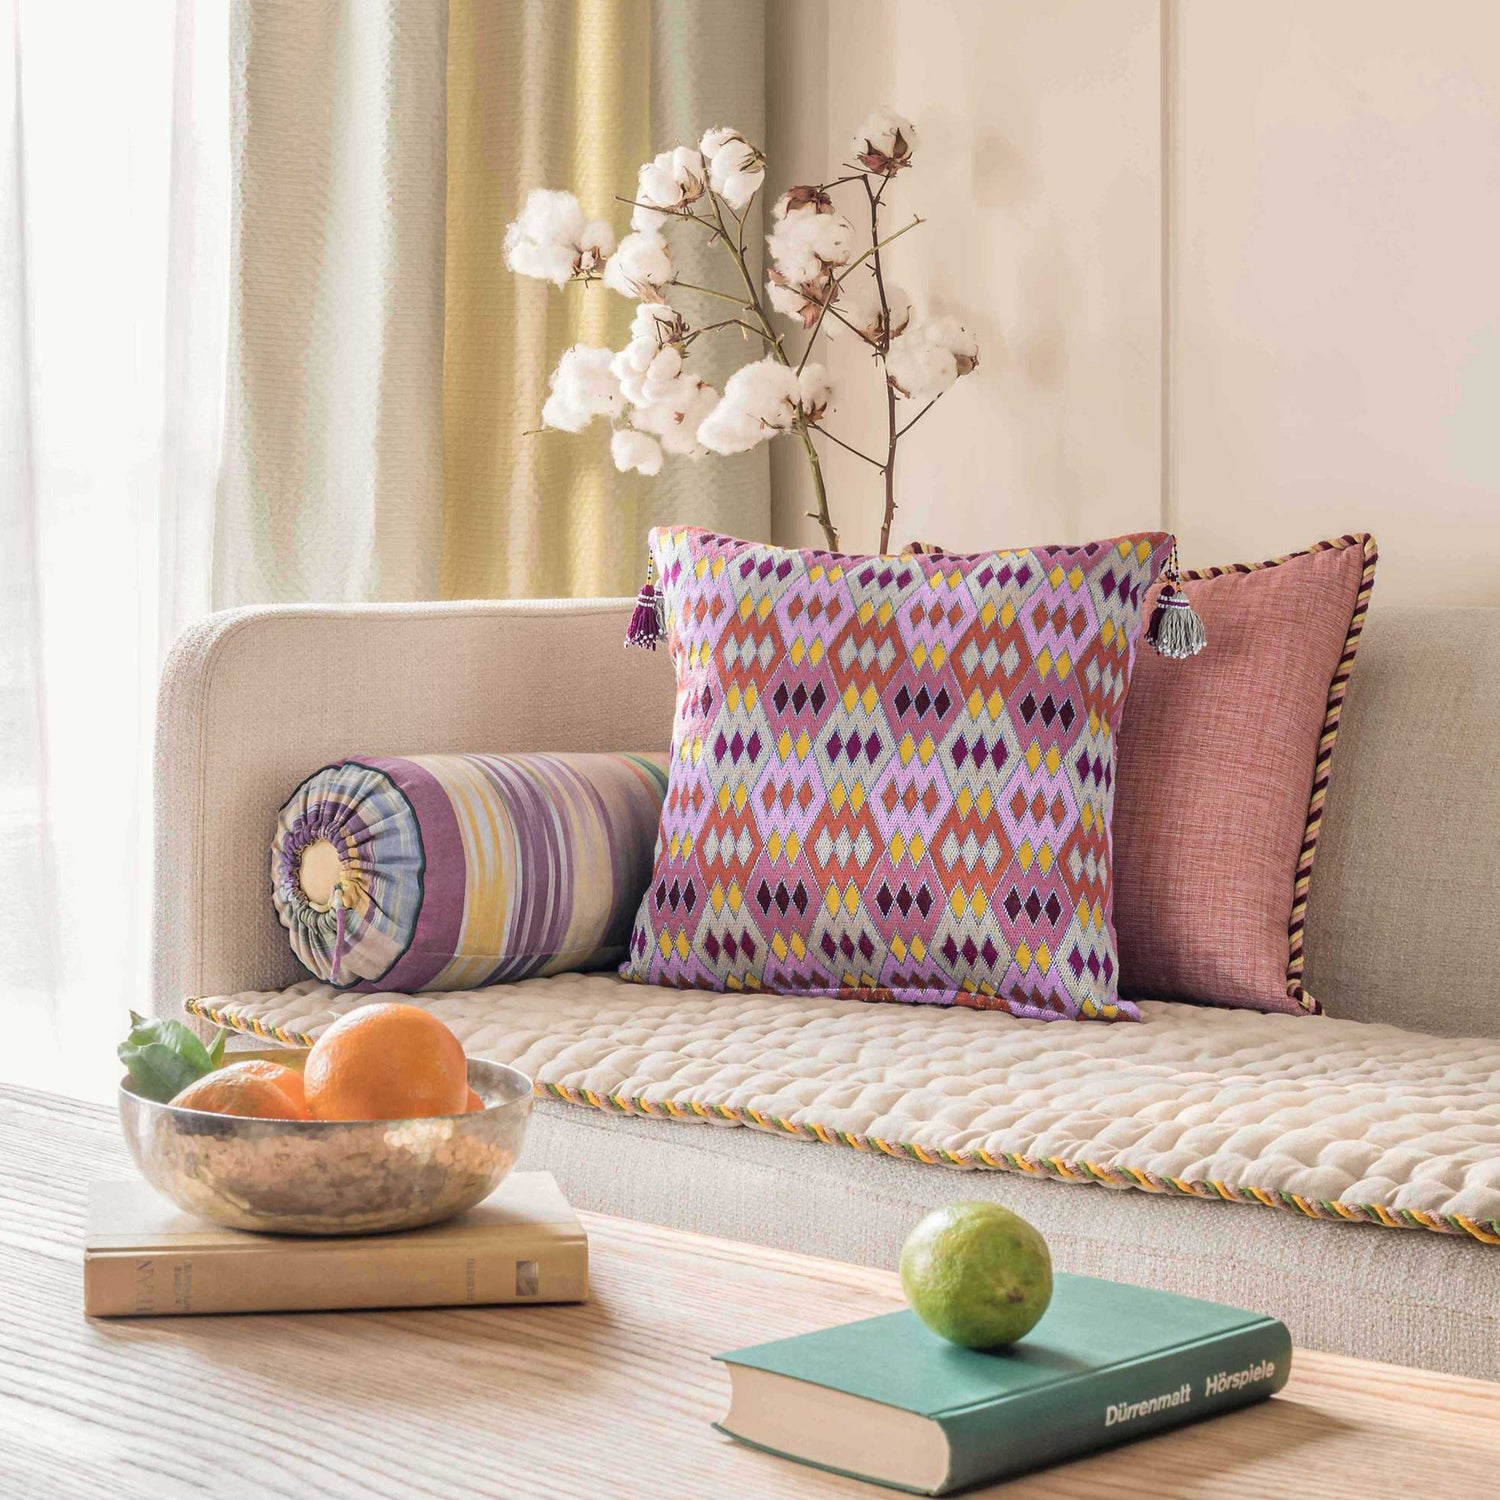 Colorful hand embroidered cushions on a couch